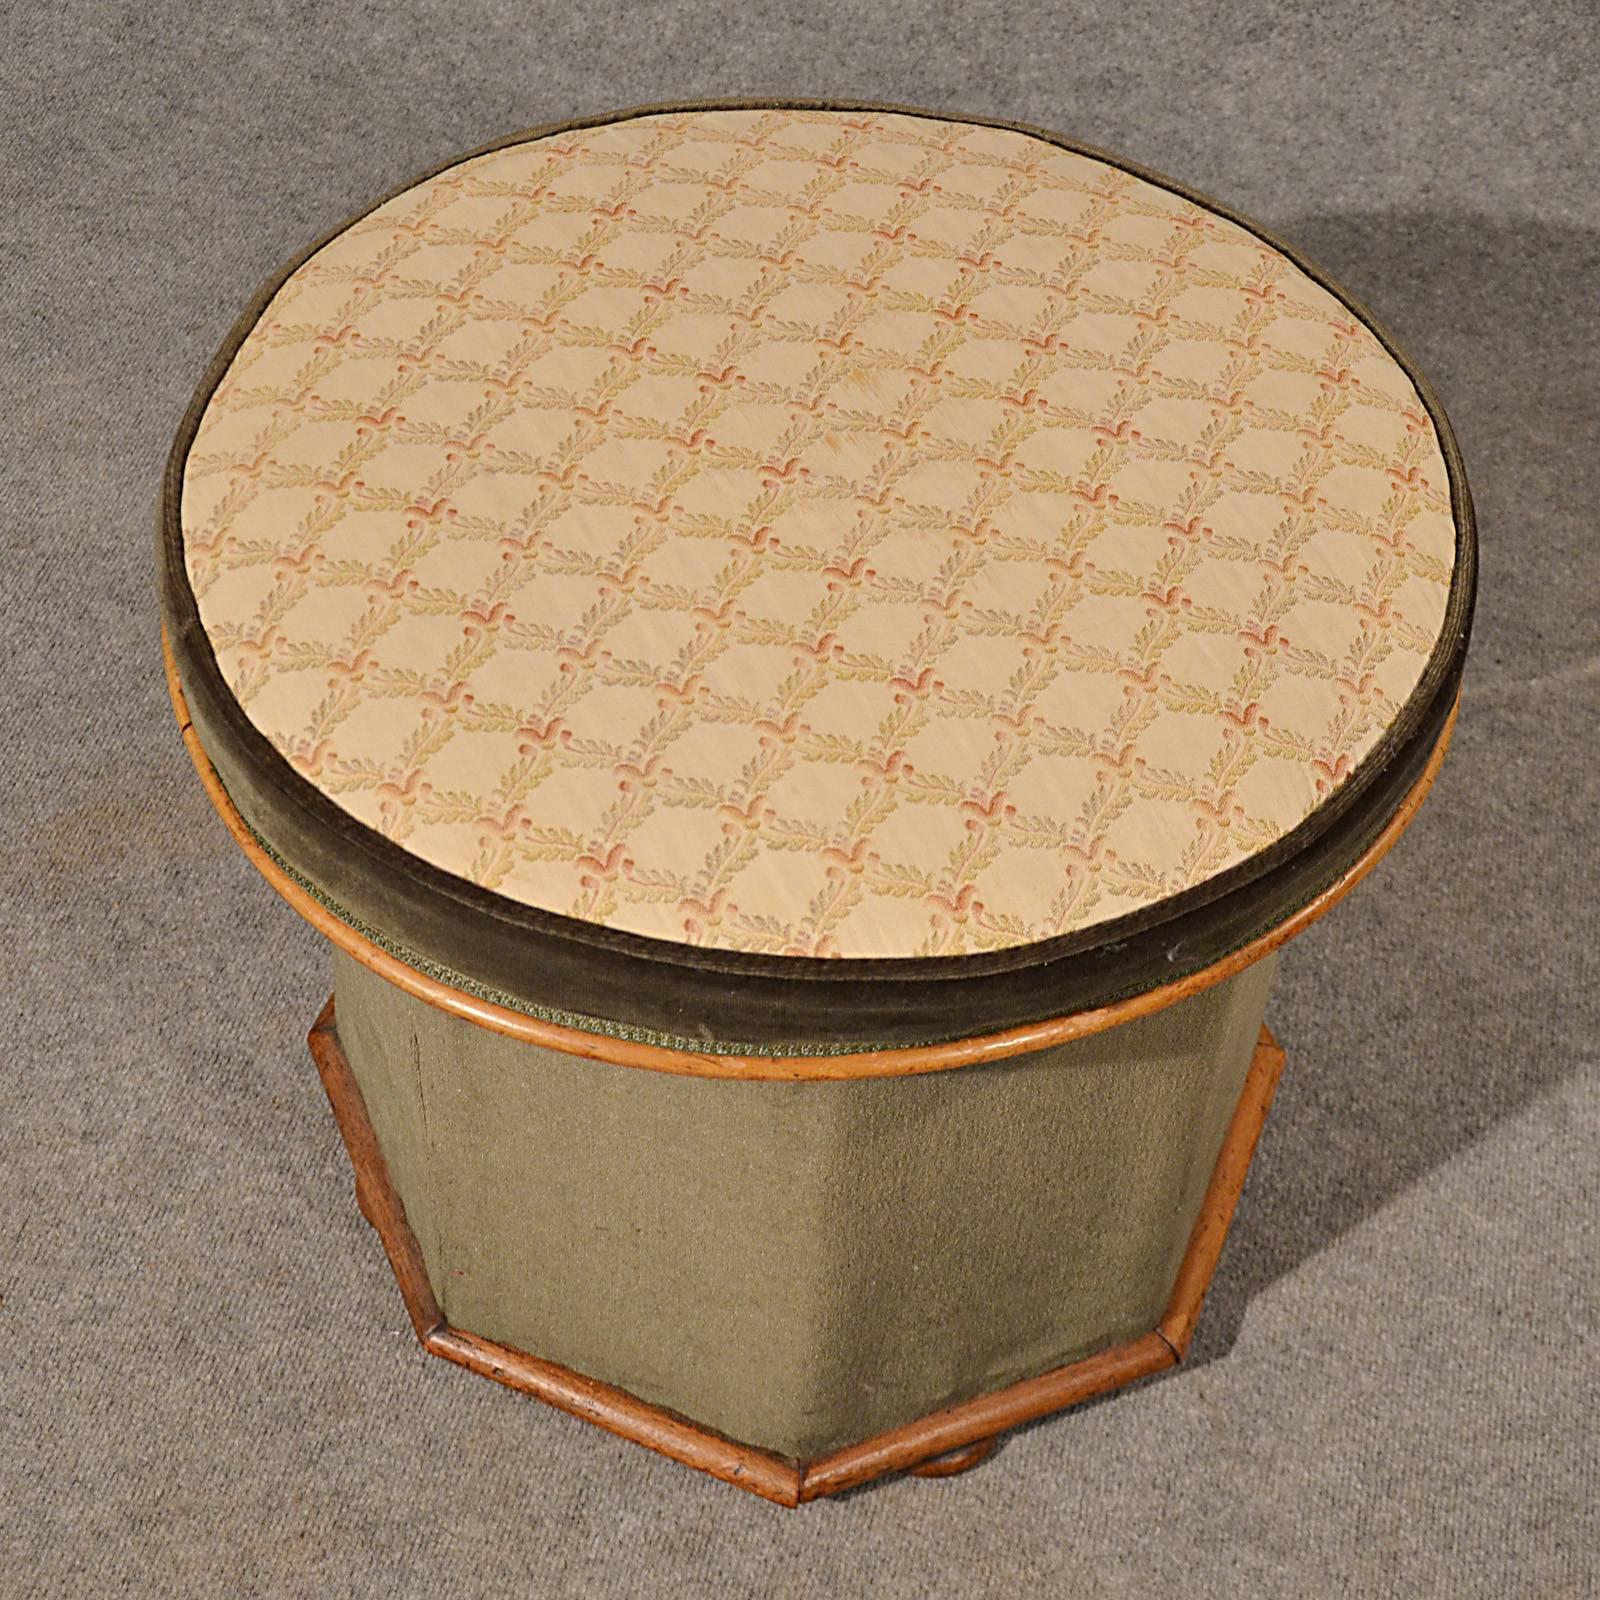 Upholstery Antique Ottoman Stool Dressing Sewing Box Seat Quality English, circa 1880